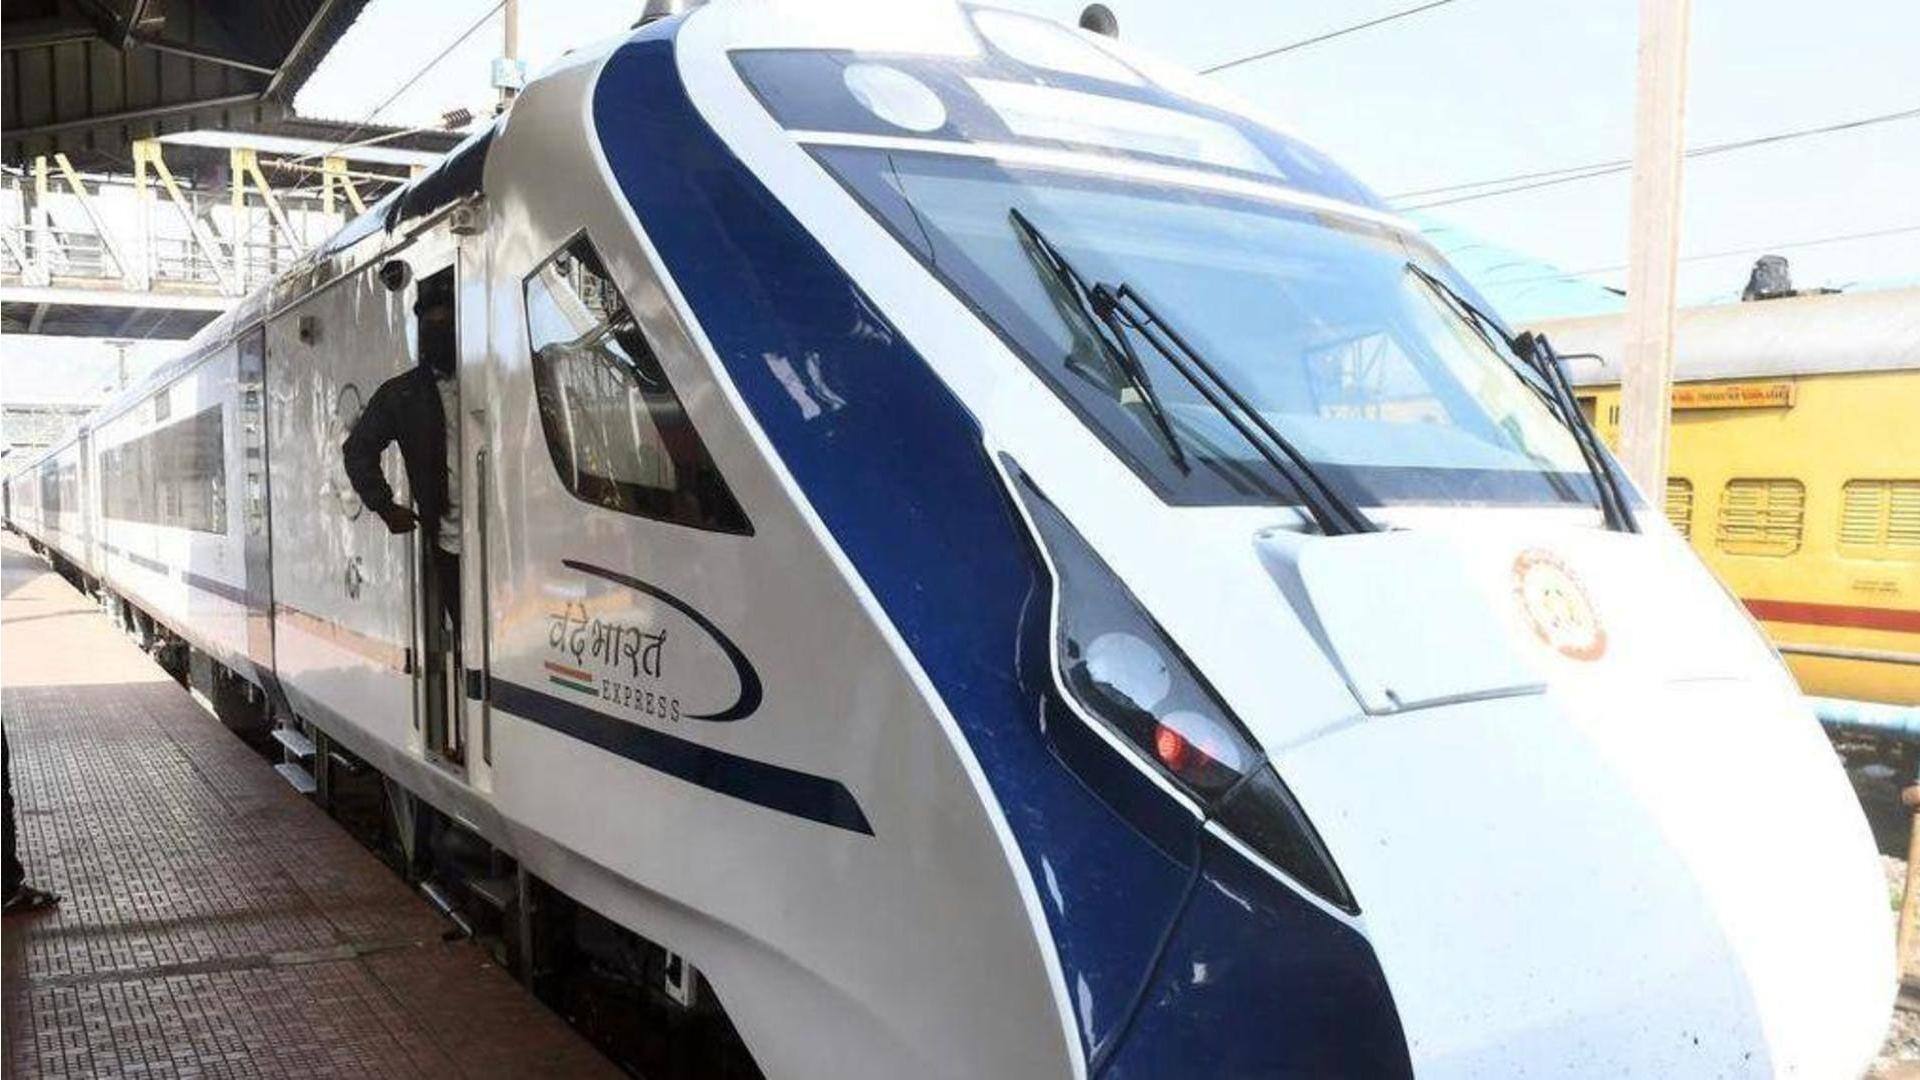 Rajasthan's 1st Vande Bharat train launched. Know its features